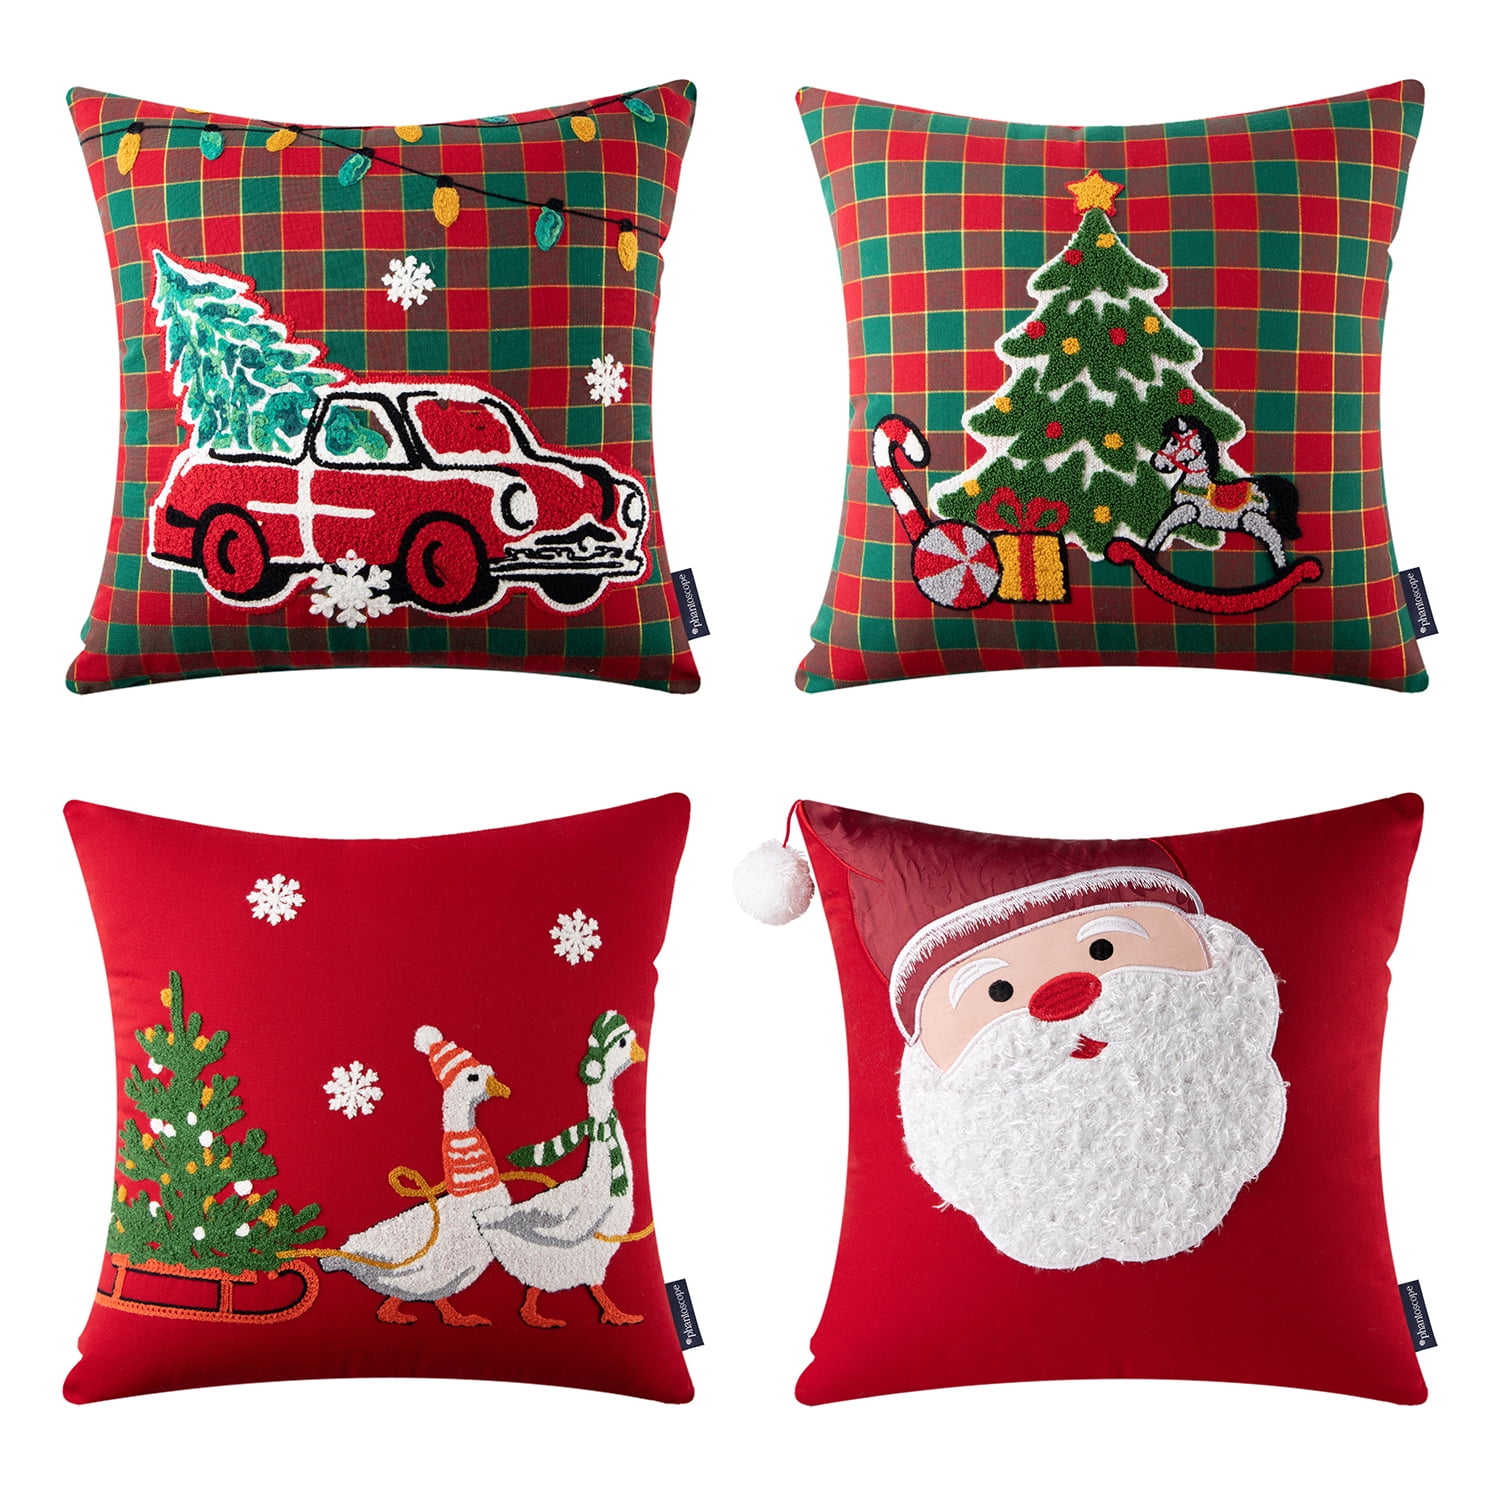 Stock Show Merry Christmas Throw Pillow Covers Set of 4 Merry Christmas Elk & Santa Claus Snowflakes Pattern Decorative Cotton Linen Red Plaid Pillowcase Cushion Cover for Sofa Bedroom Car 18 x 18